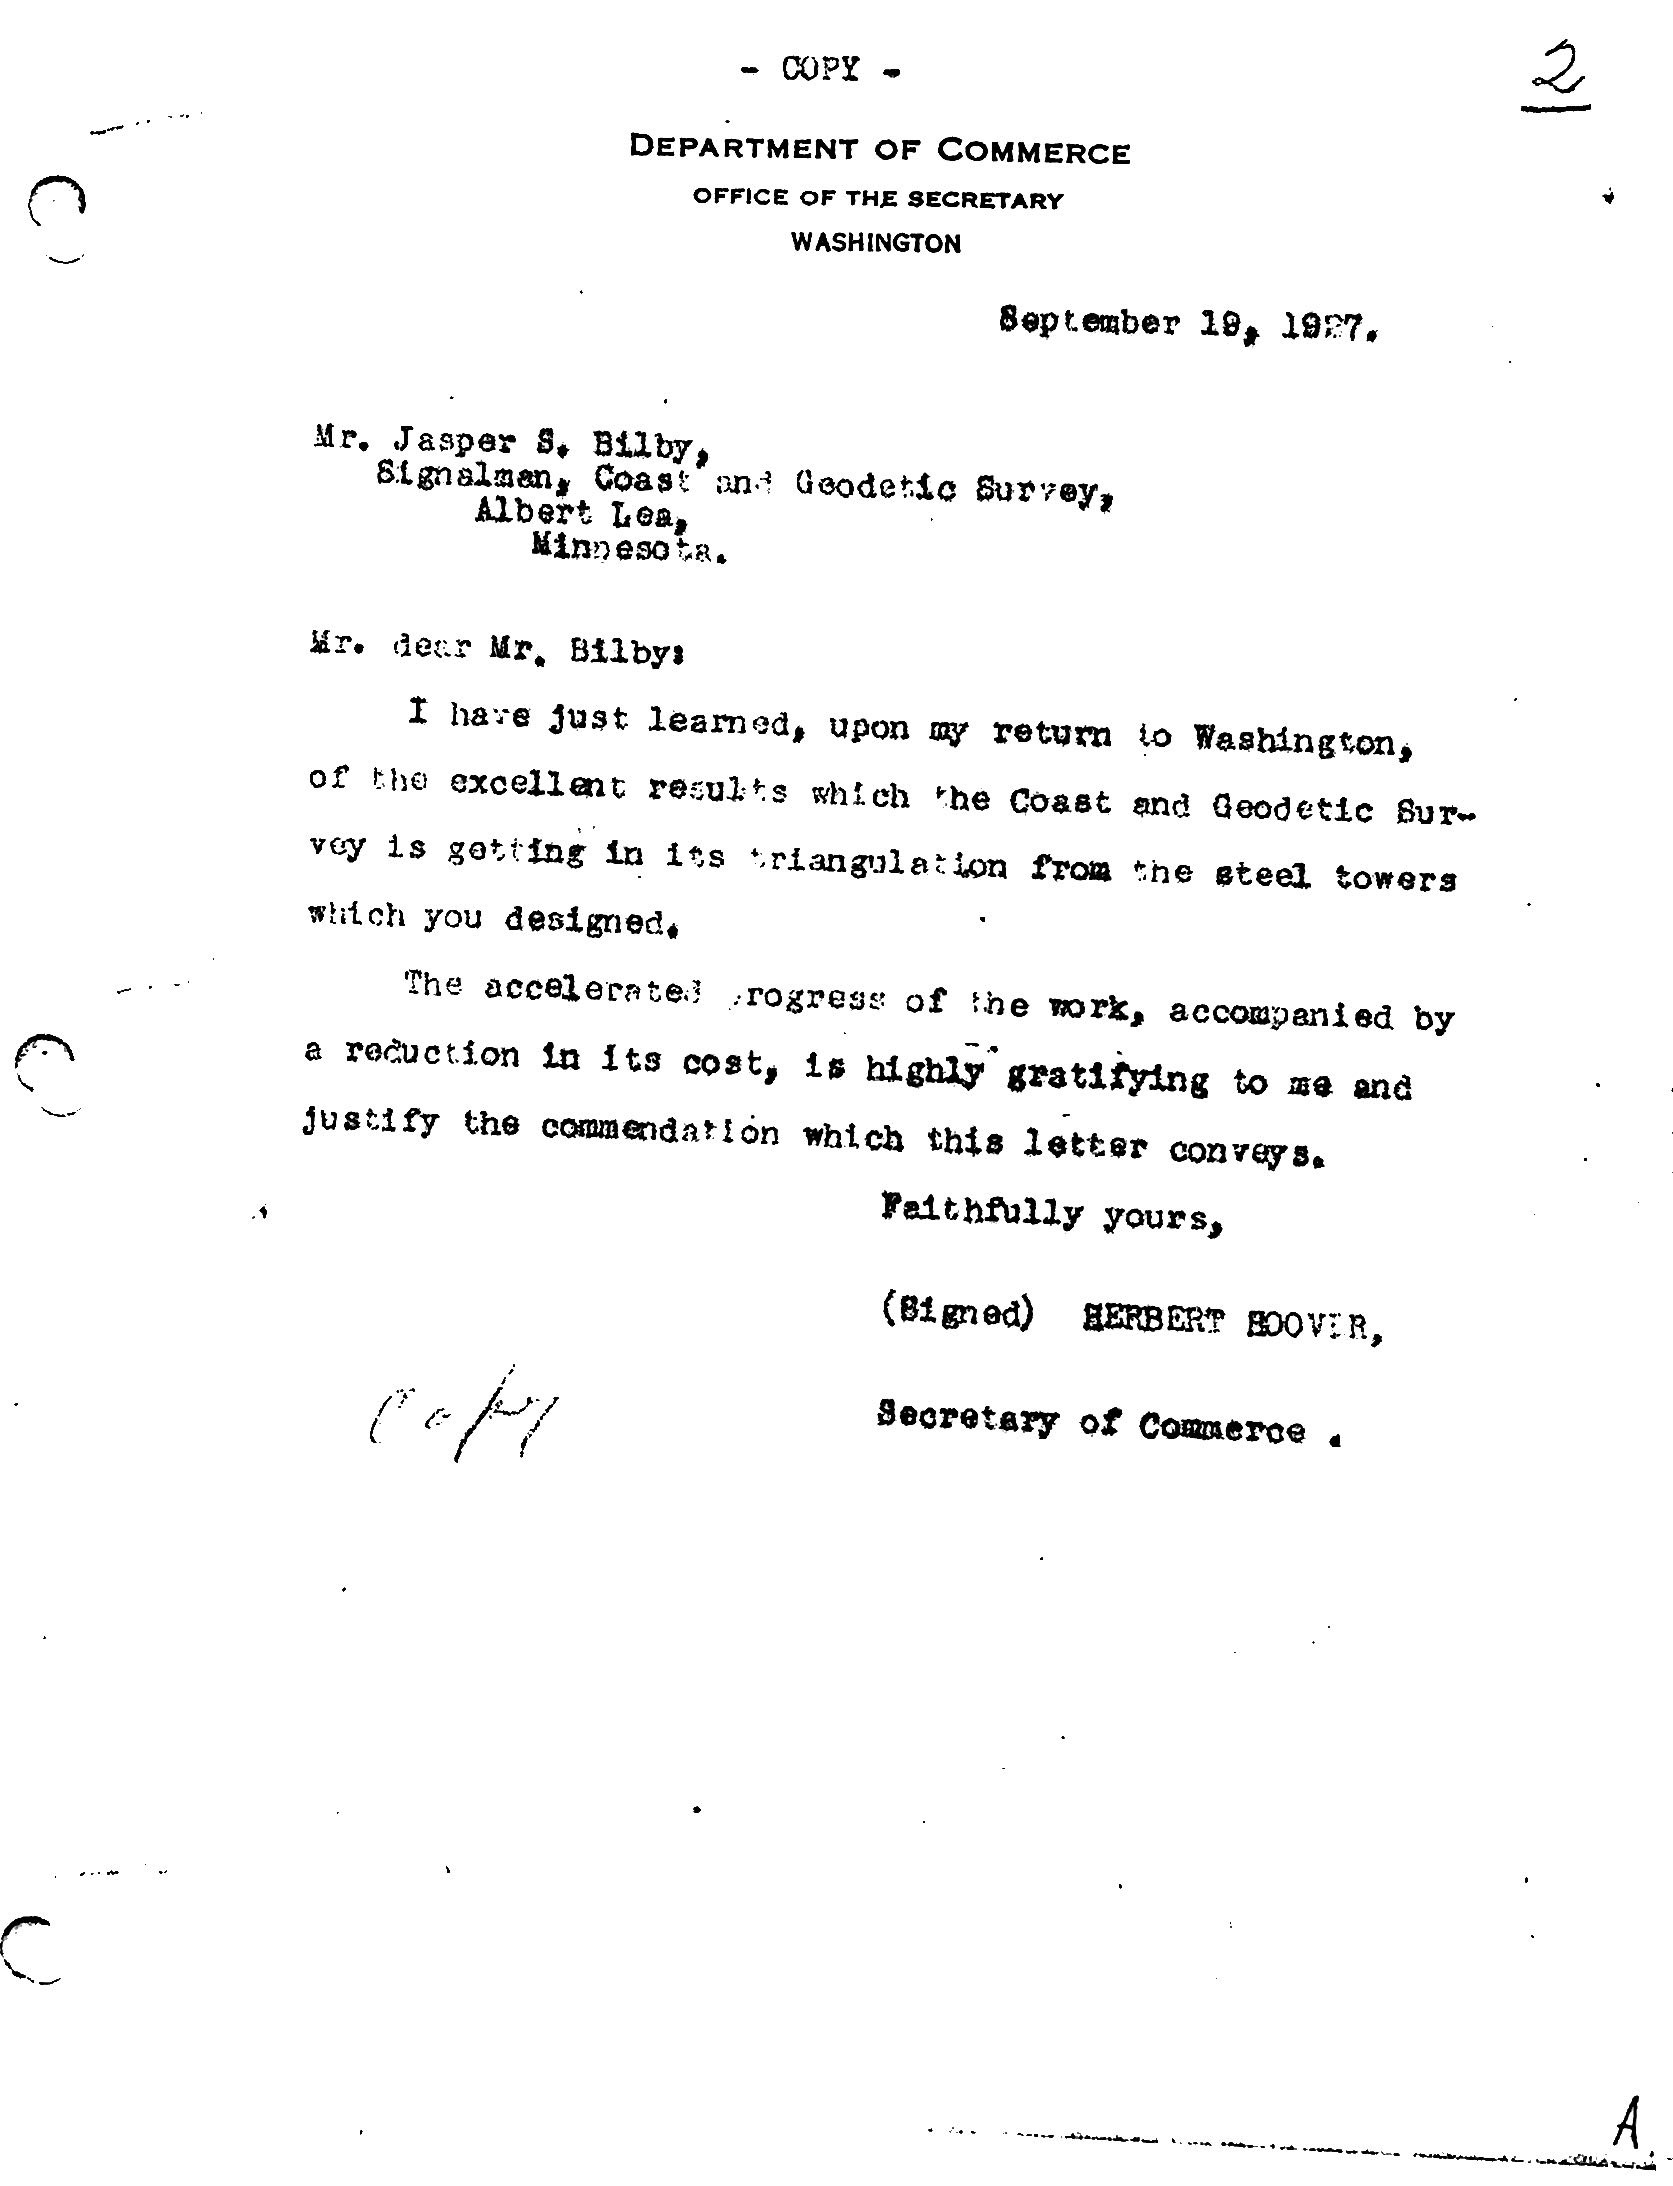 Letter from Secretary of Commerce Herbert Hoover to Jasper Sherman Bilby. Hoover commends Bilby for his invention of the Bilby Steel Tower. Courtesy of Surveyors Historical Society Collection.